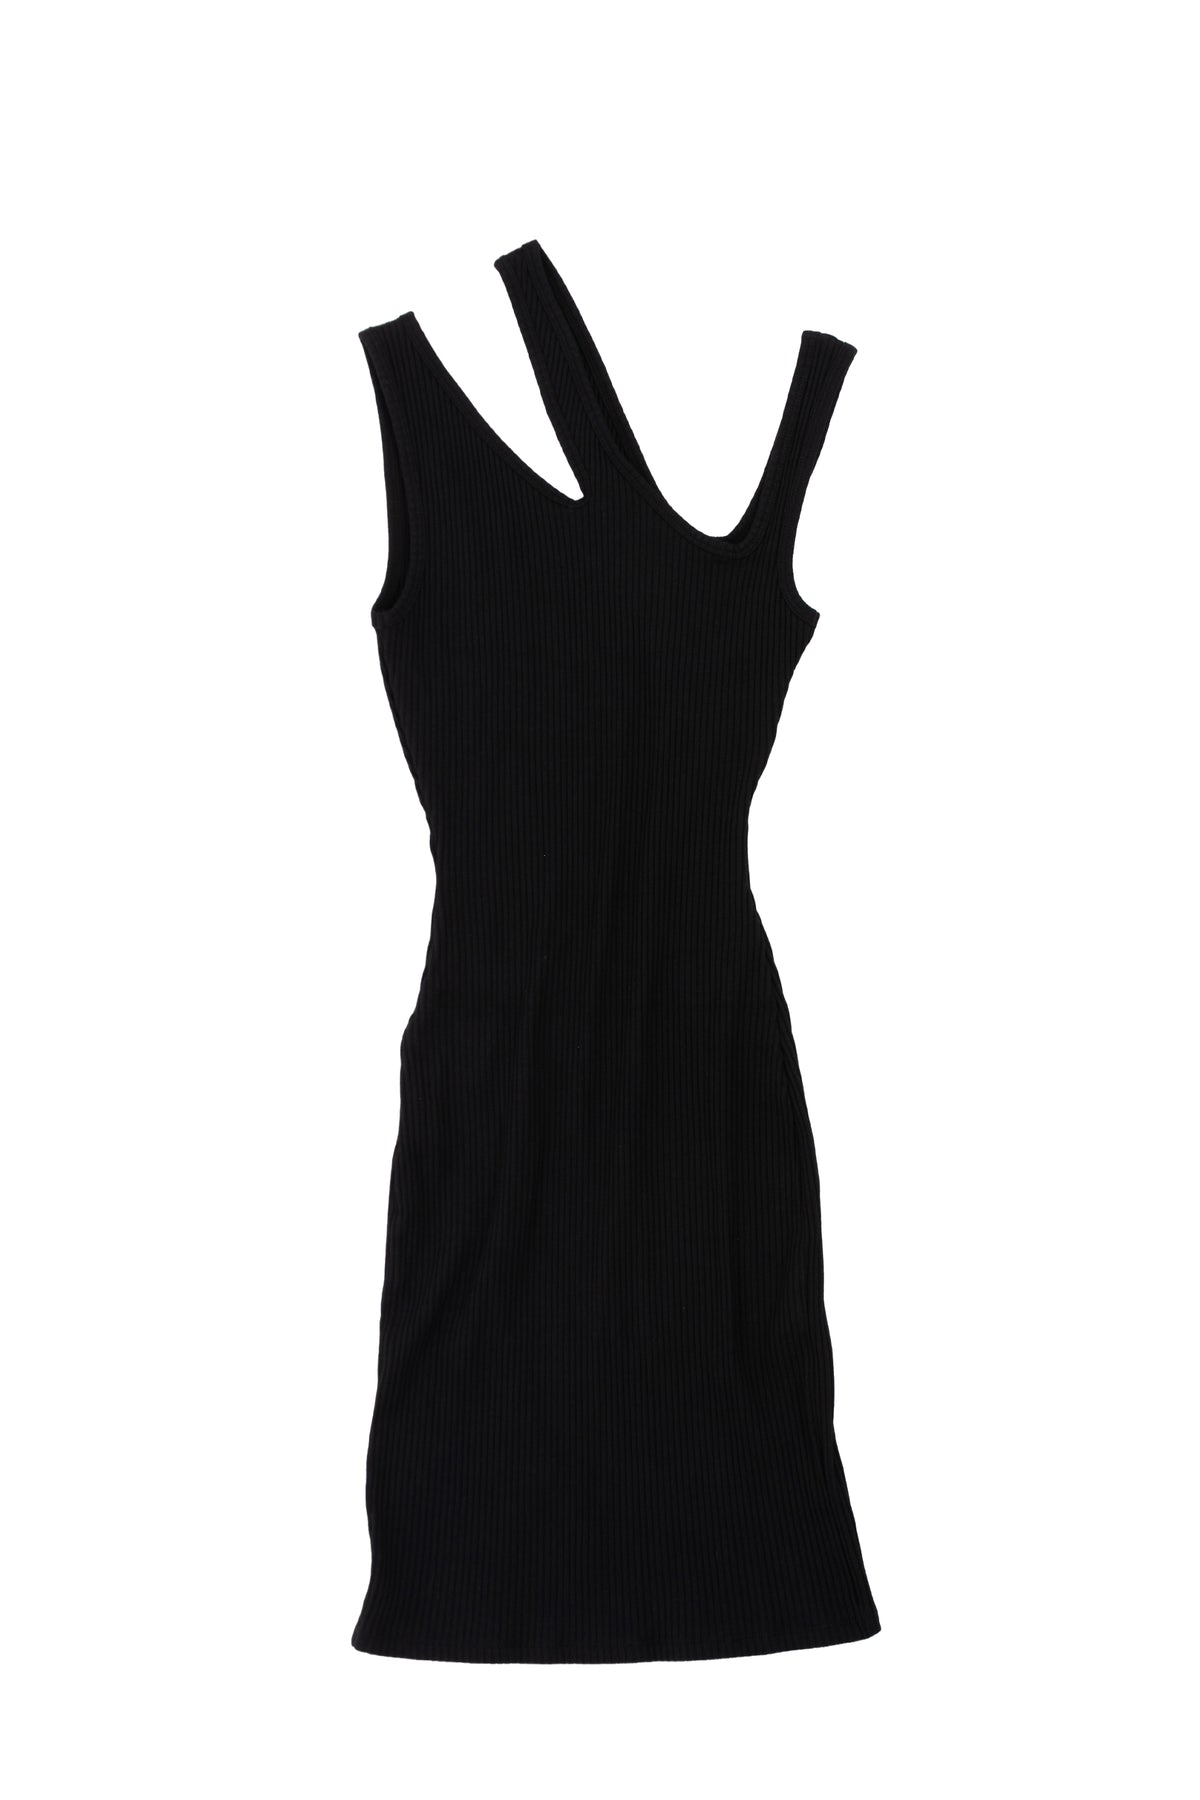 RIBBED CUT-OUT DRESS / BLK